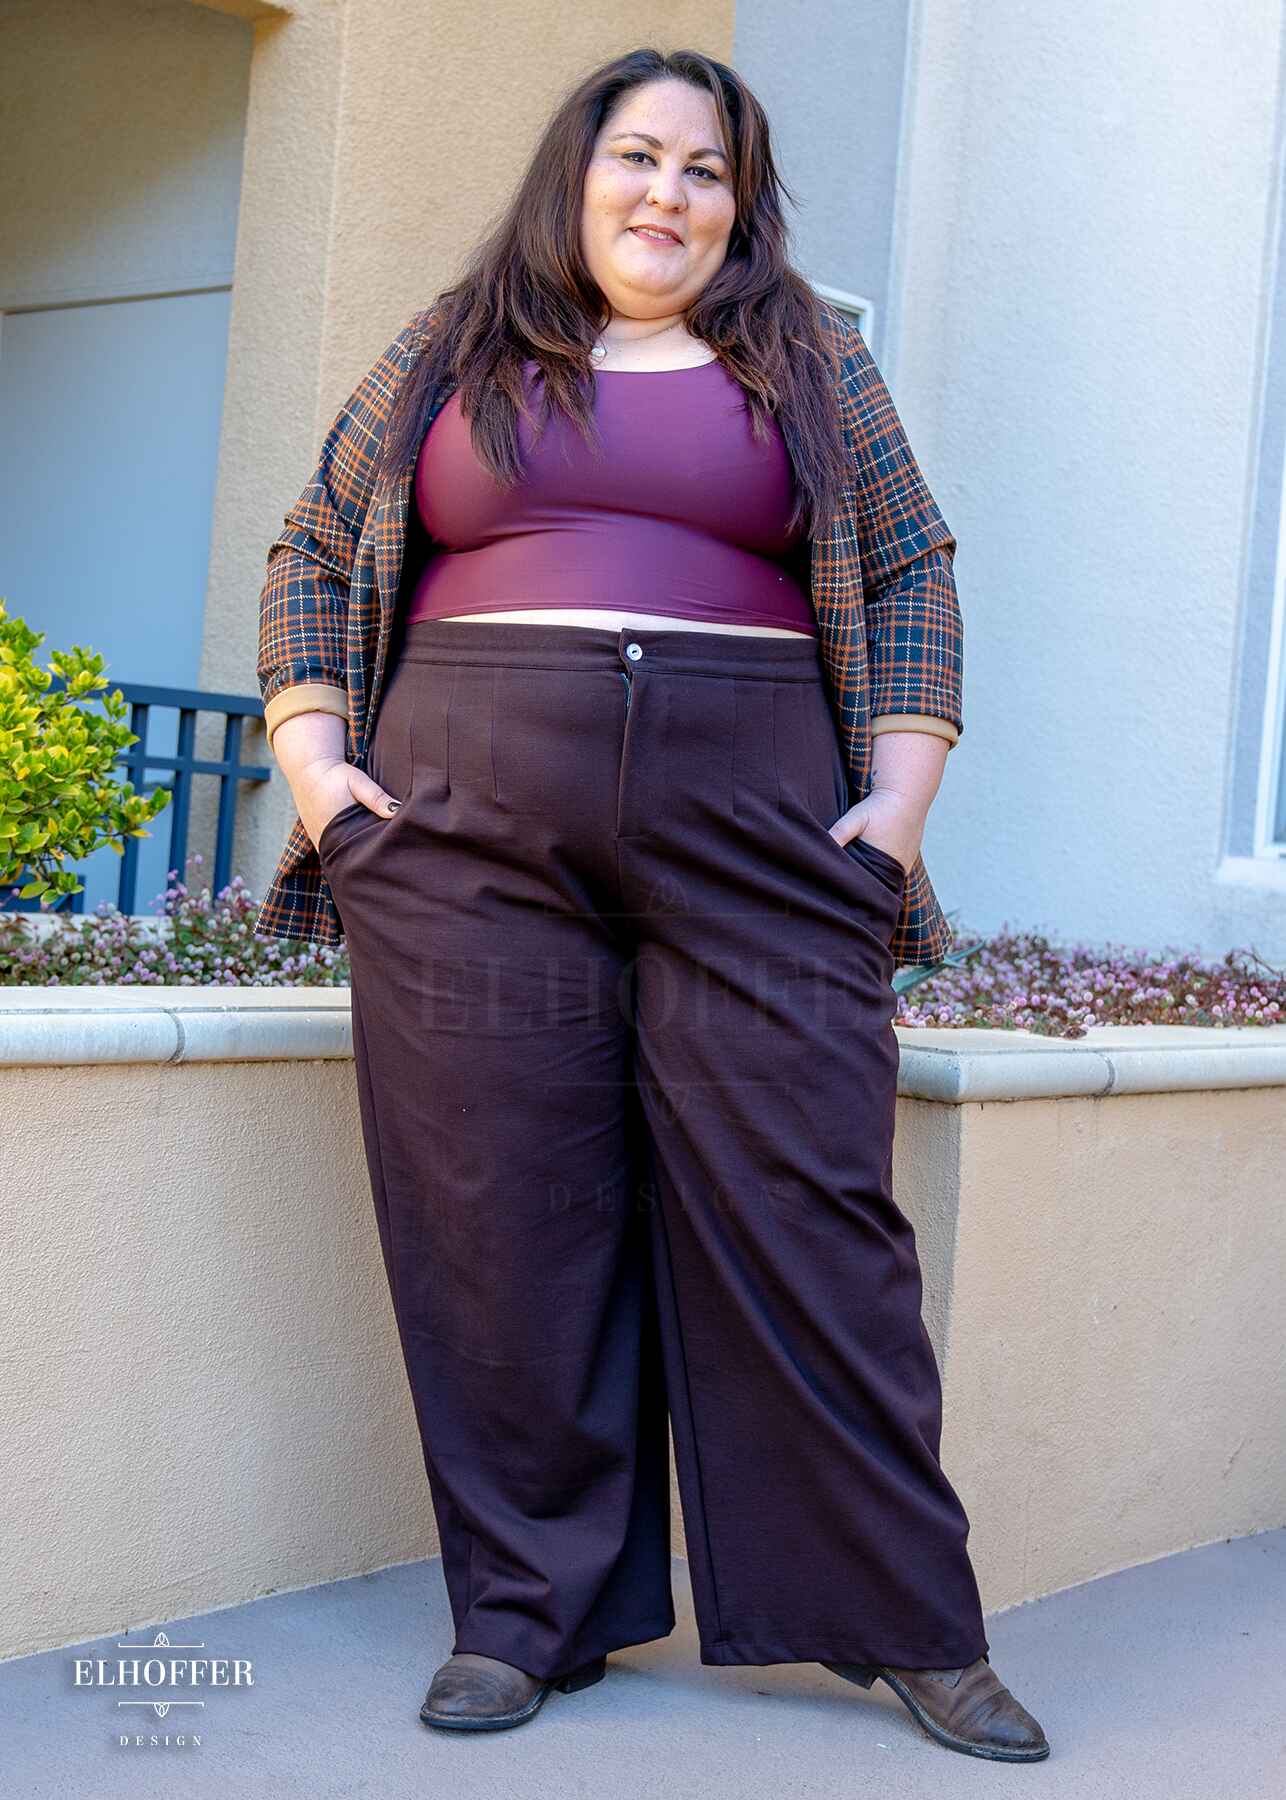 Alysia, a sun kissed skin 2xl model with long dark brown hair, is wearing chocolate brown wide leg trousers.  The trousers feature a front zipper and button closure, pleated front, side pockets, and elastic in the back of the waistband for adjustability and cinch. She paired the trousers with a dark purplish red scoop neck sleeveless crop top.